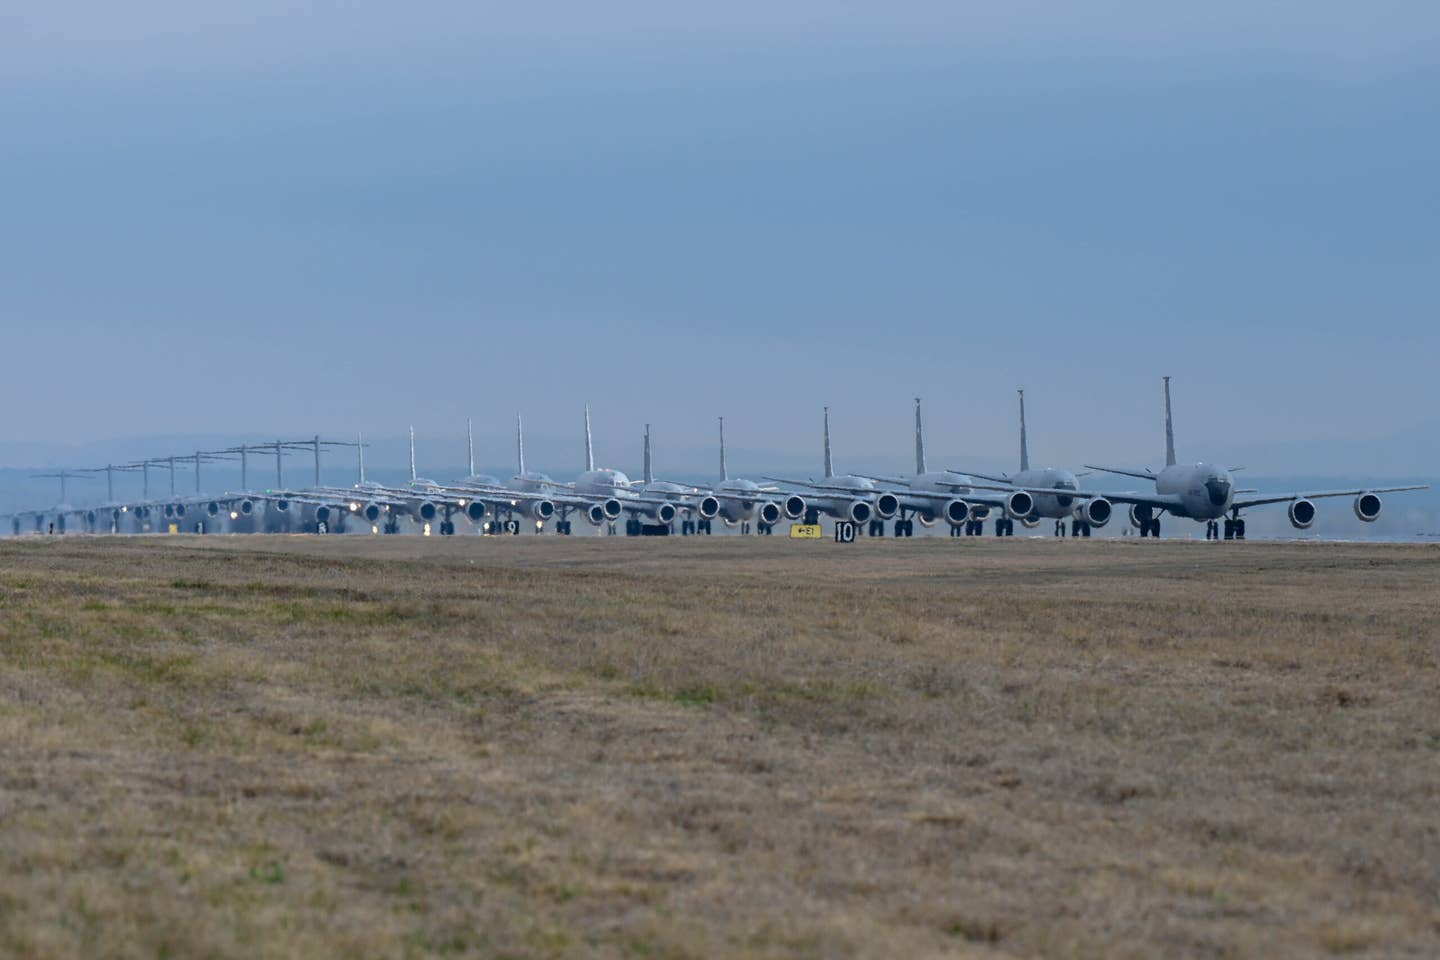 C-17s, KC-135s, and KC-46s line up for the elephant walk at Altus Air Force Base, Oklahoma, on March 24. <em>U.S. Air Force photo by Senior Airman Trenton Jancze</em>